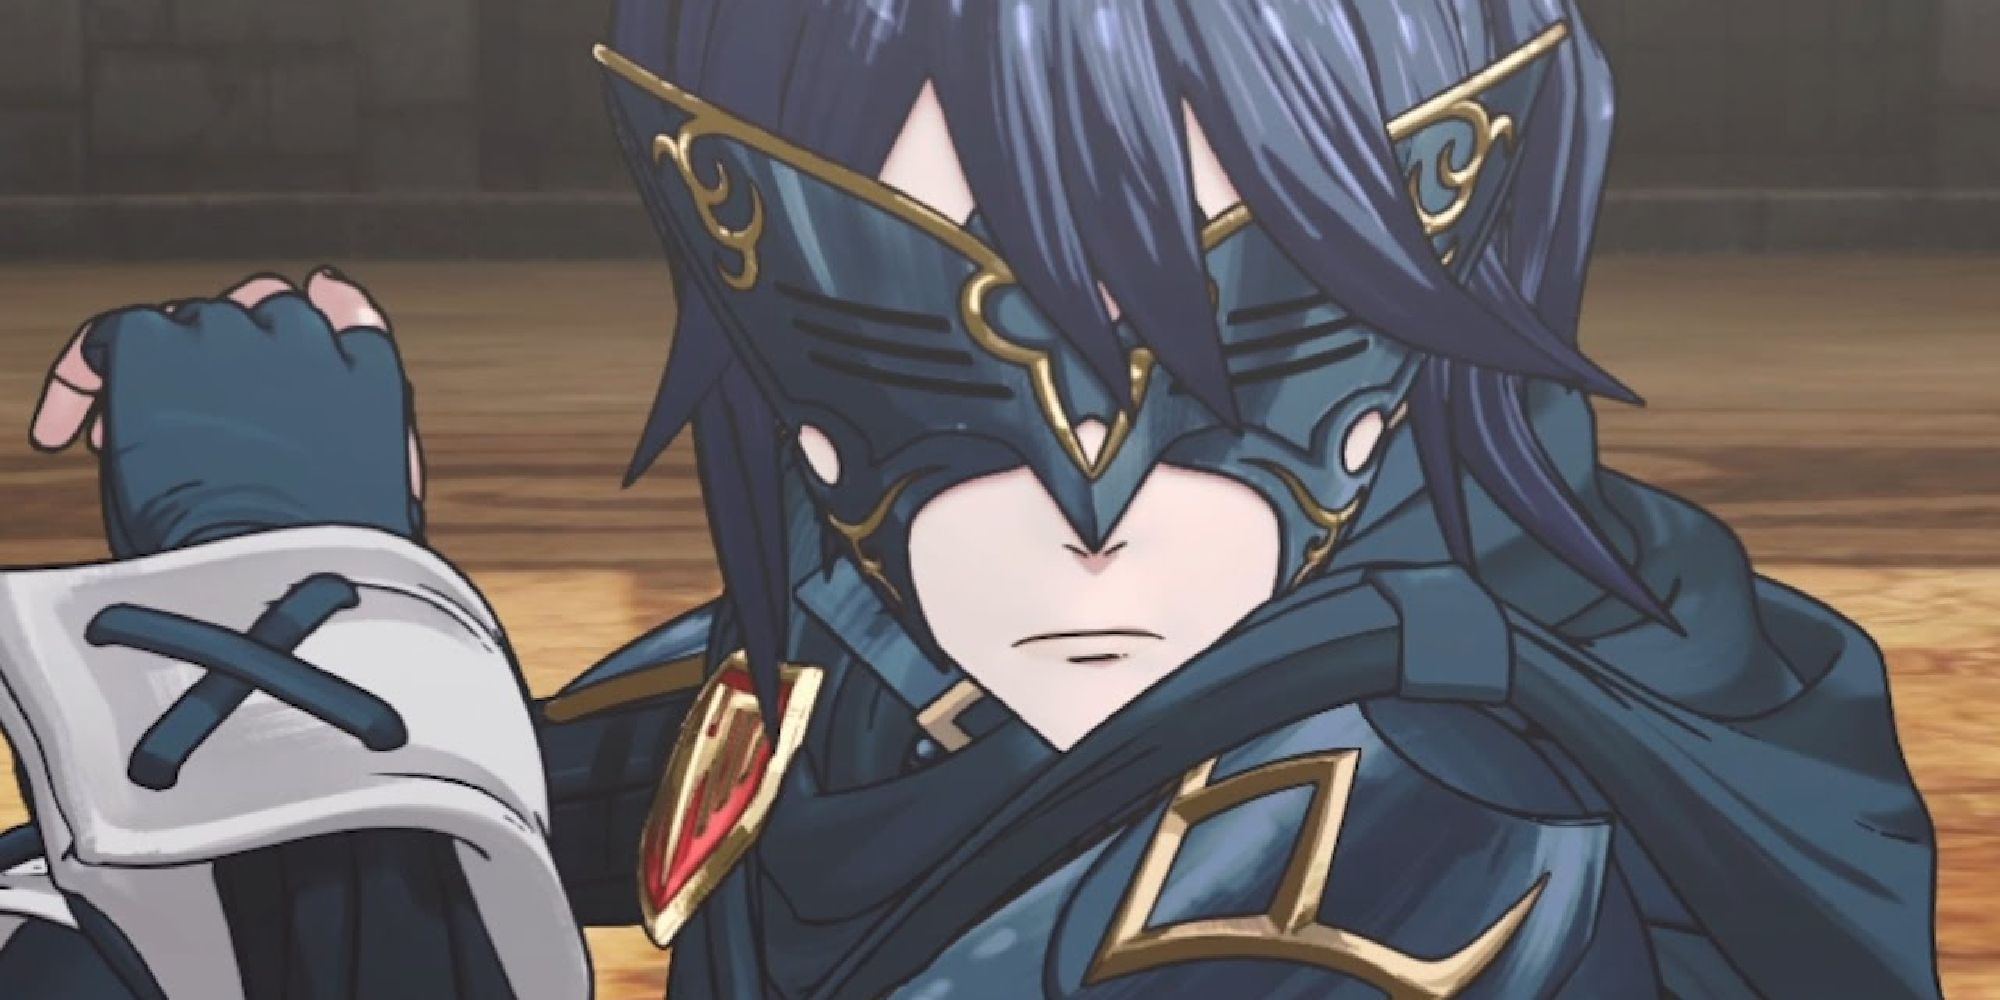 Lucina disguised as Marth in a cutscene from Fire Emblem Awakening